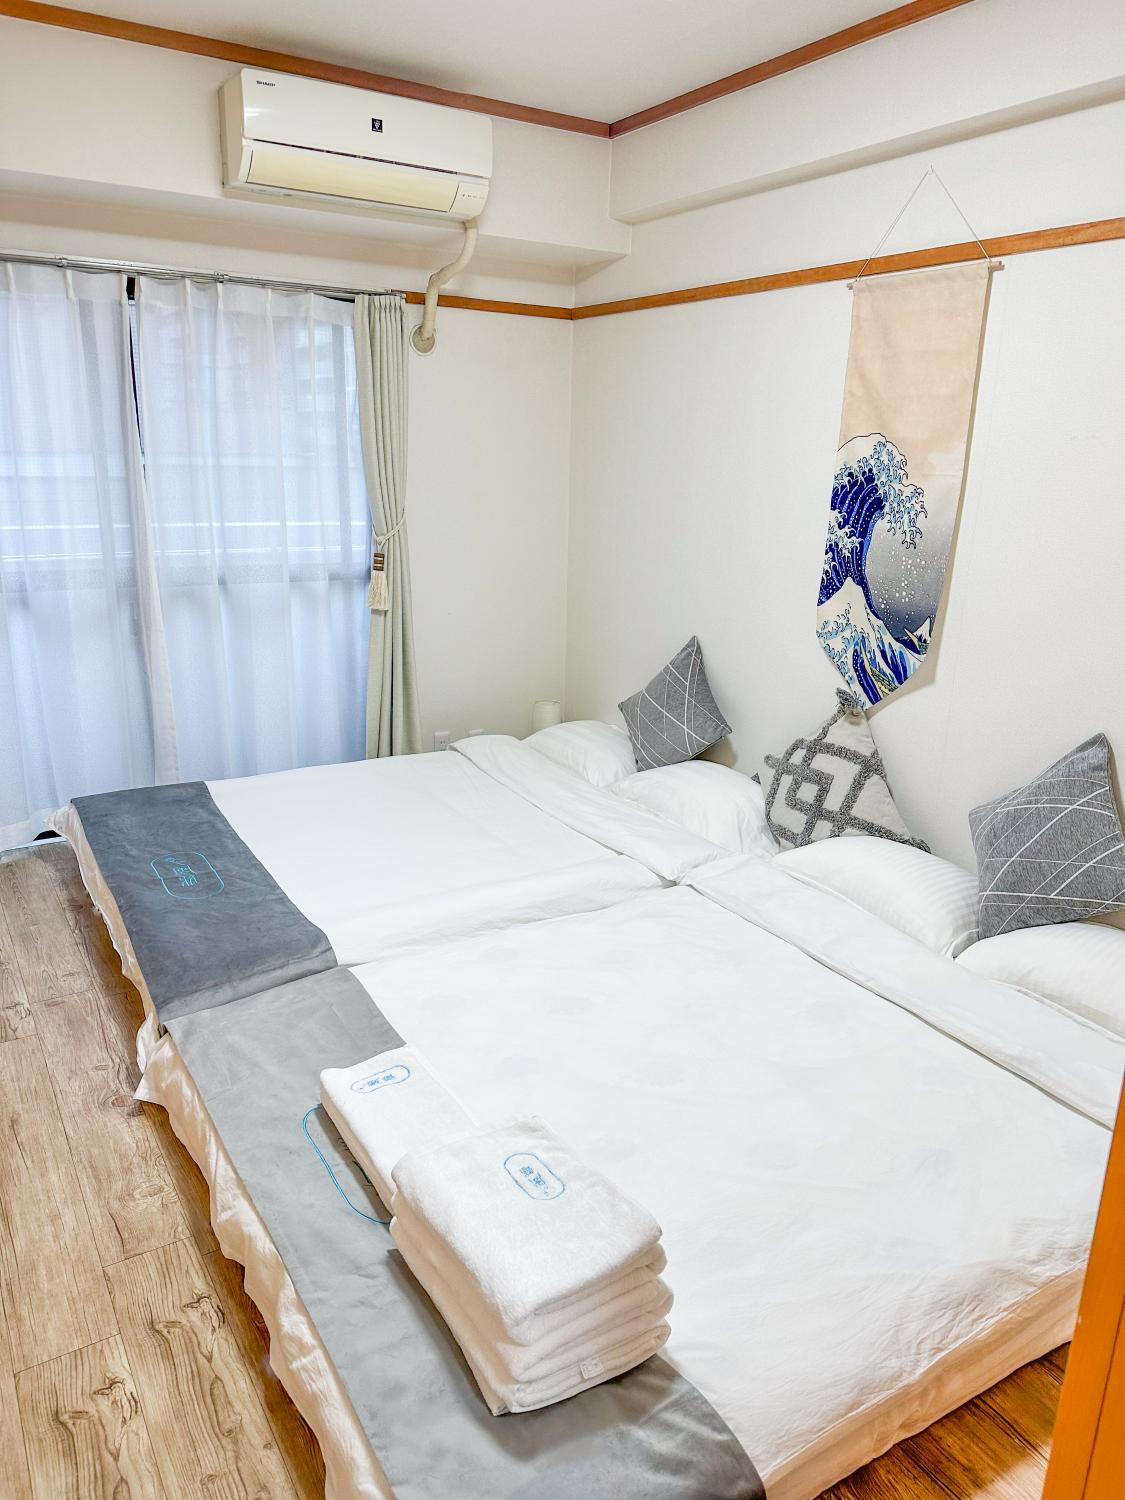 New mansion in Asakusa 403,Skytree bus 1 min,free wifi,cook,24 hours convenience, Taitō